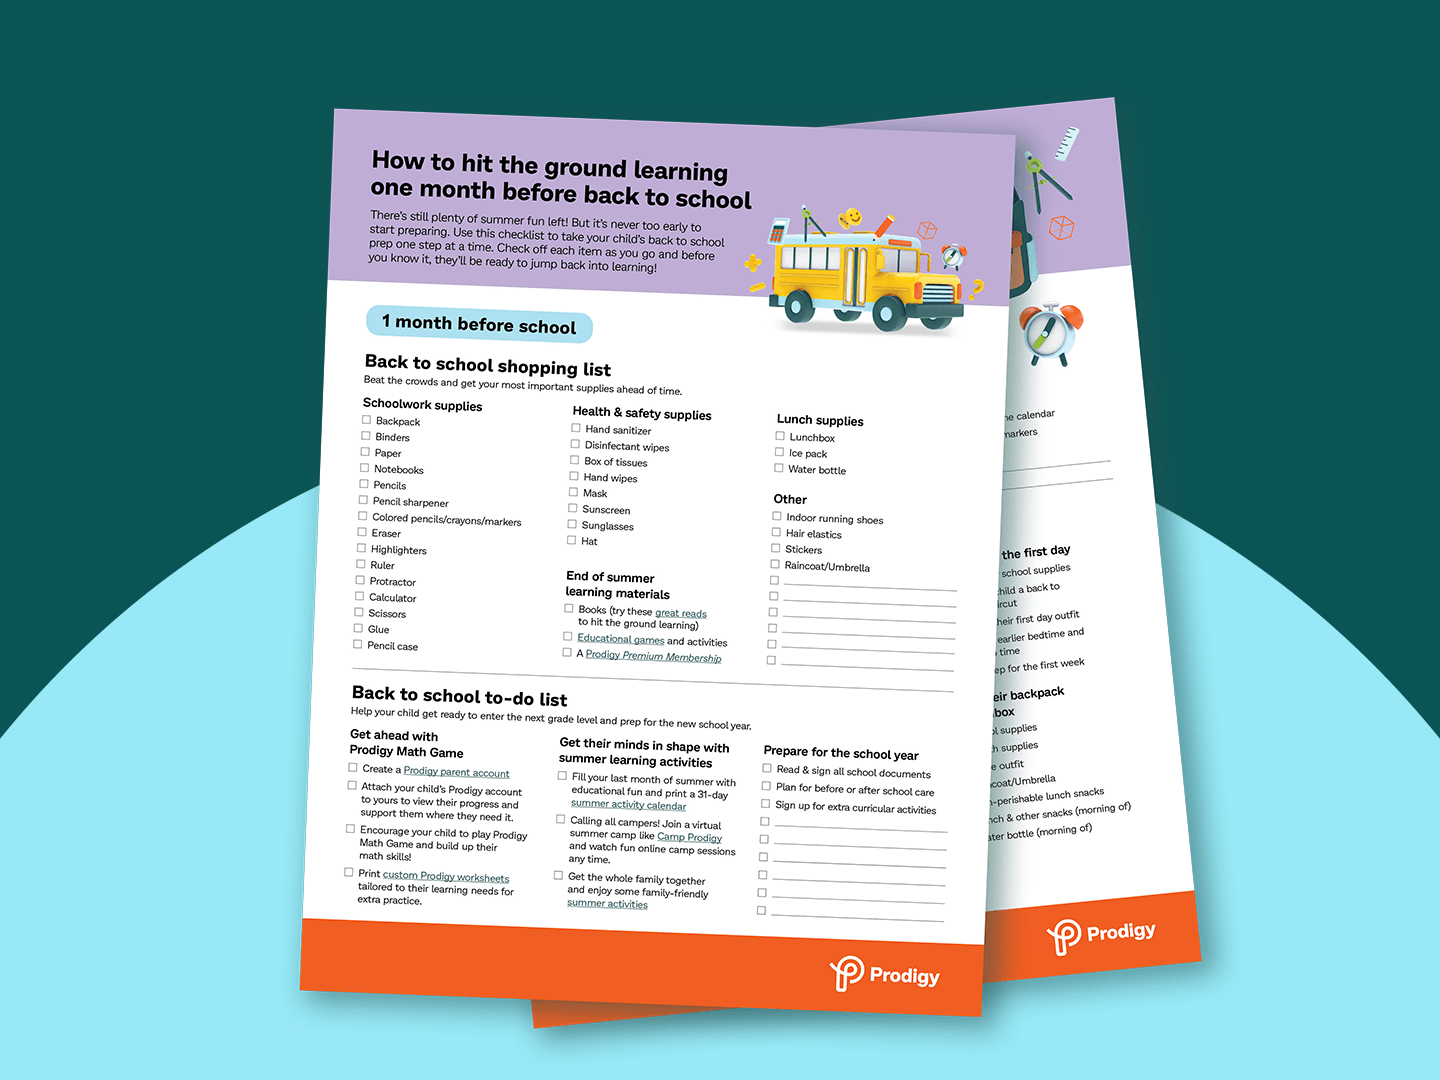 Preview of Prodigy's downloadable back to school checklist